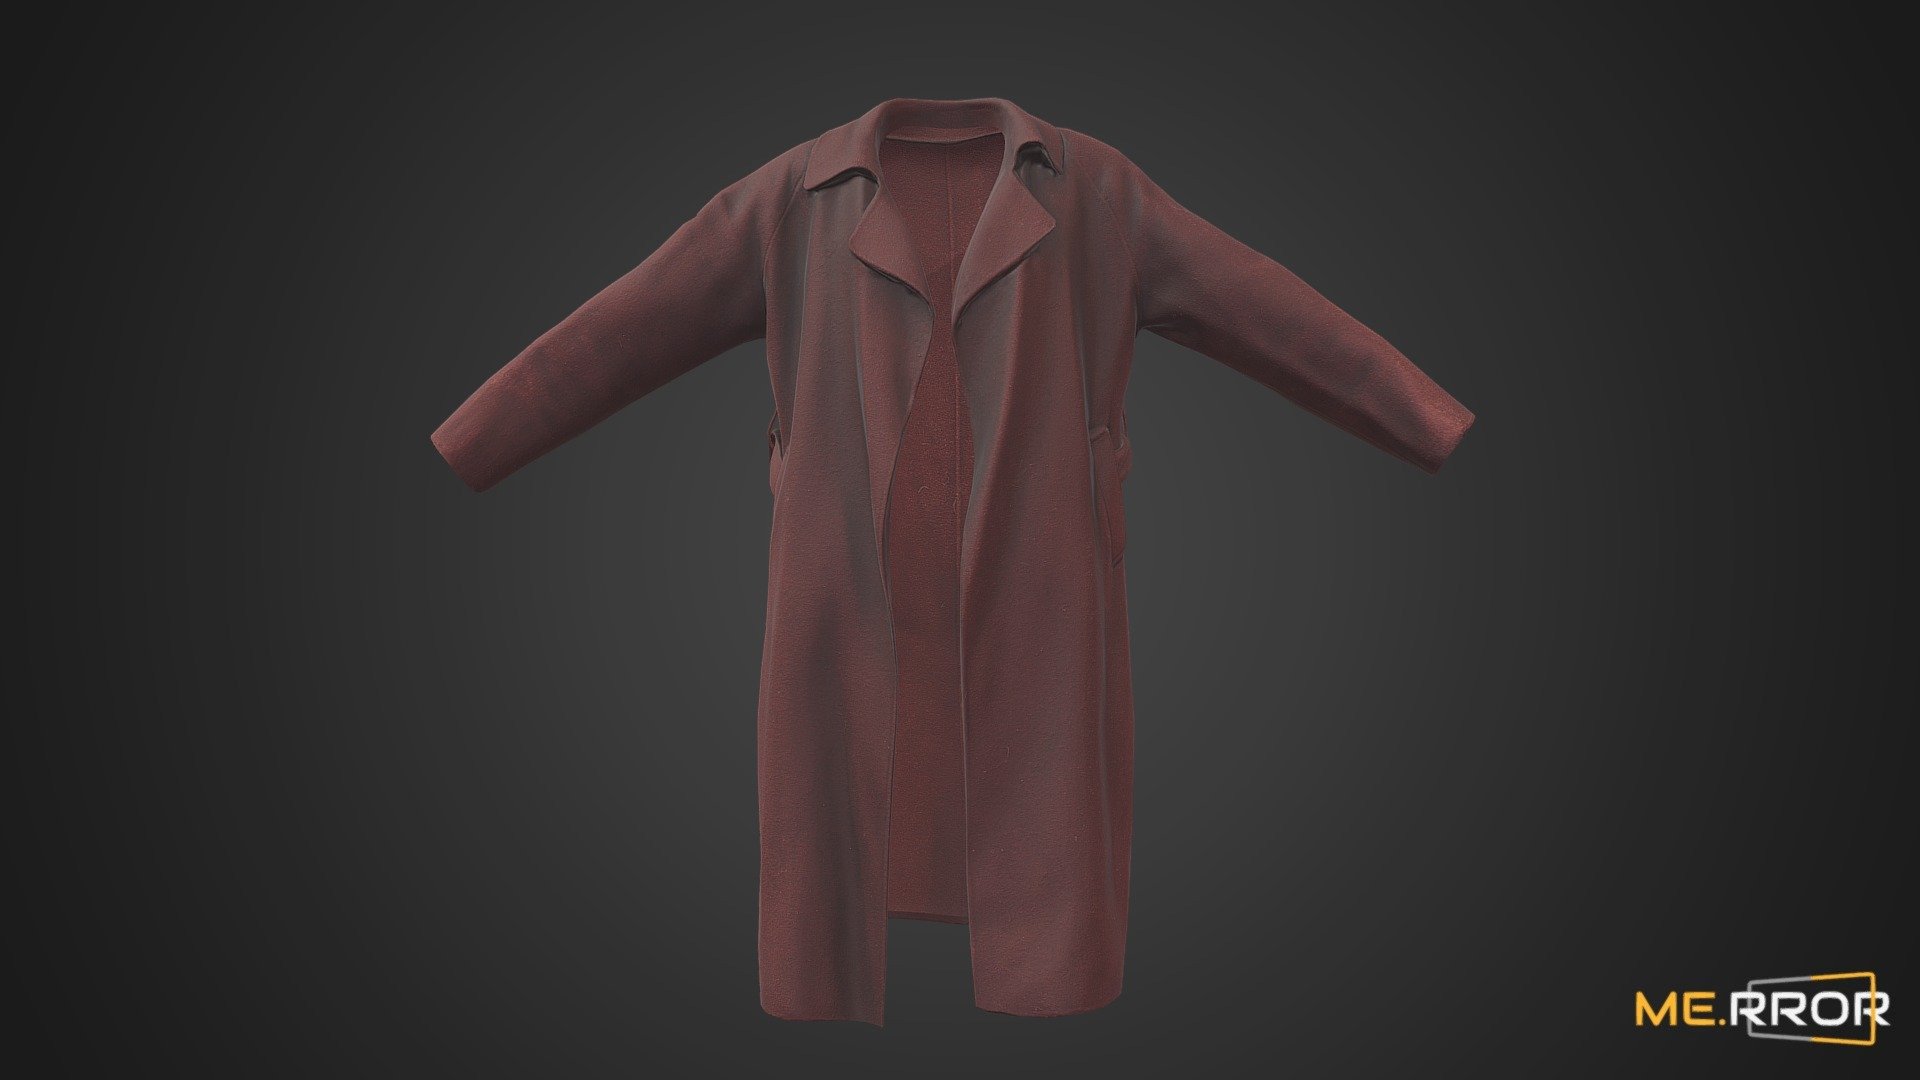 MERROR is a 3D Content PLATFORM which introduces various Asian assets to the 3D world


3DScanning #Photogrametry #ME.RROR - [Game-Ready] Burgundy Coat - Buy Royalty Free 3D model by ME.RROR (@merror) 3d model